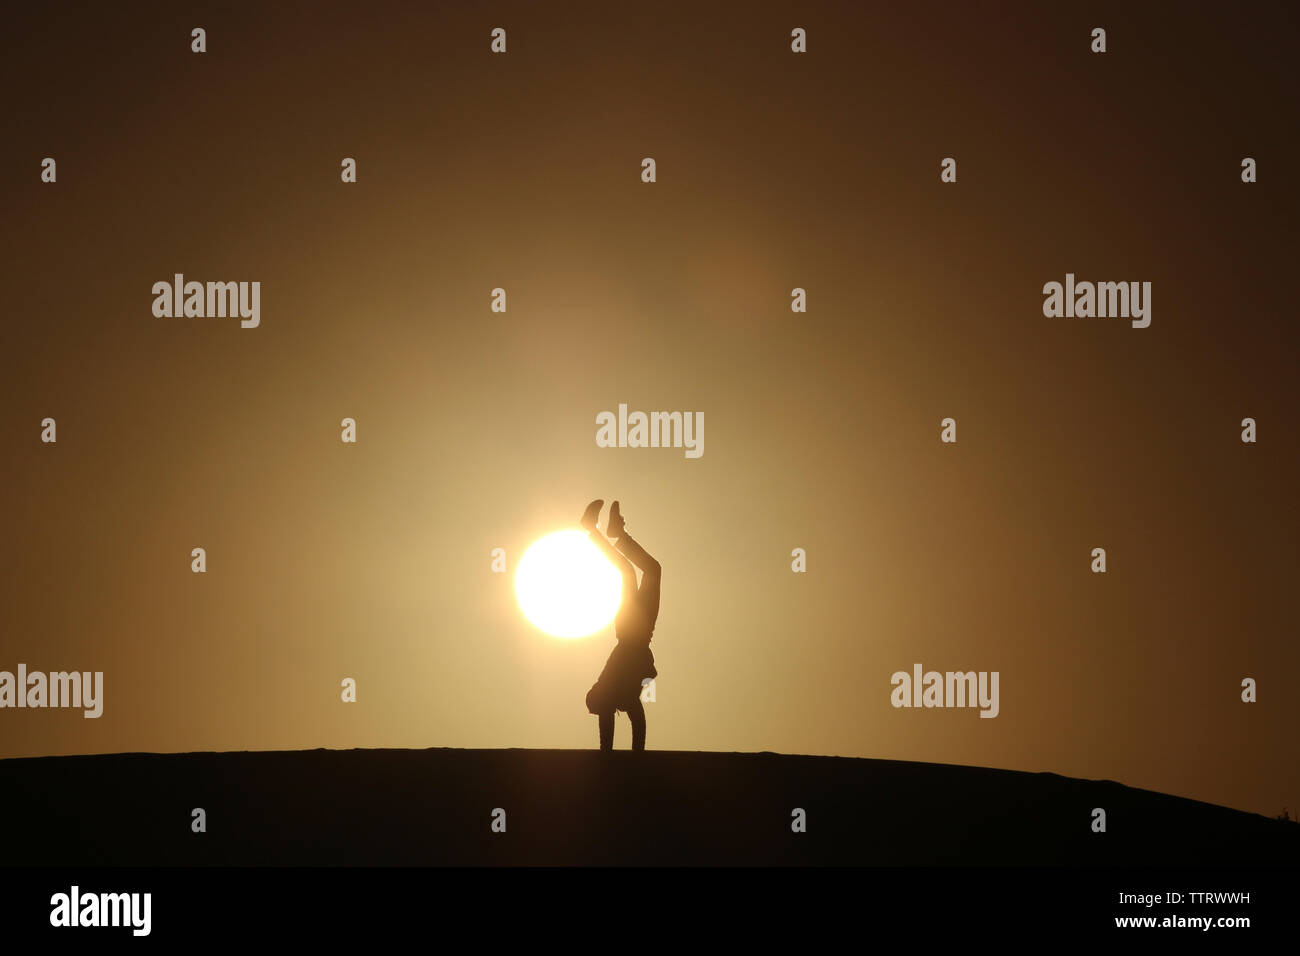 Silhouette man doing handstand on field against clear sky during sunset Stock Photo